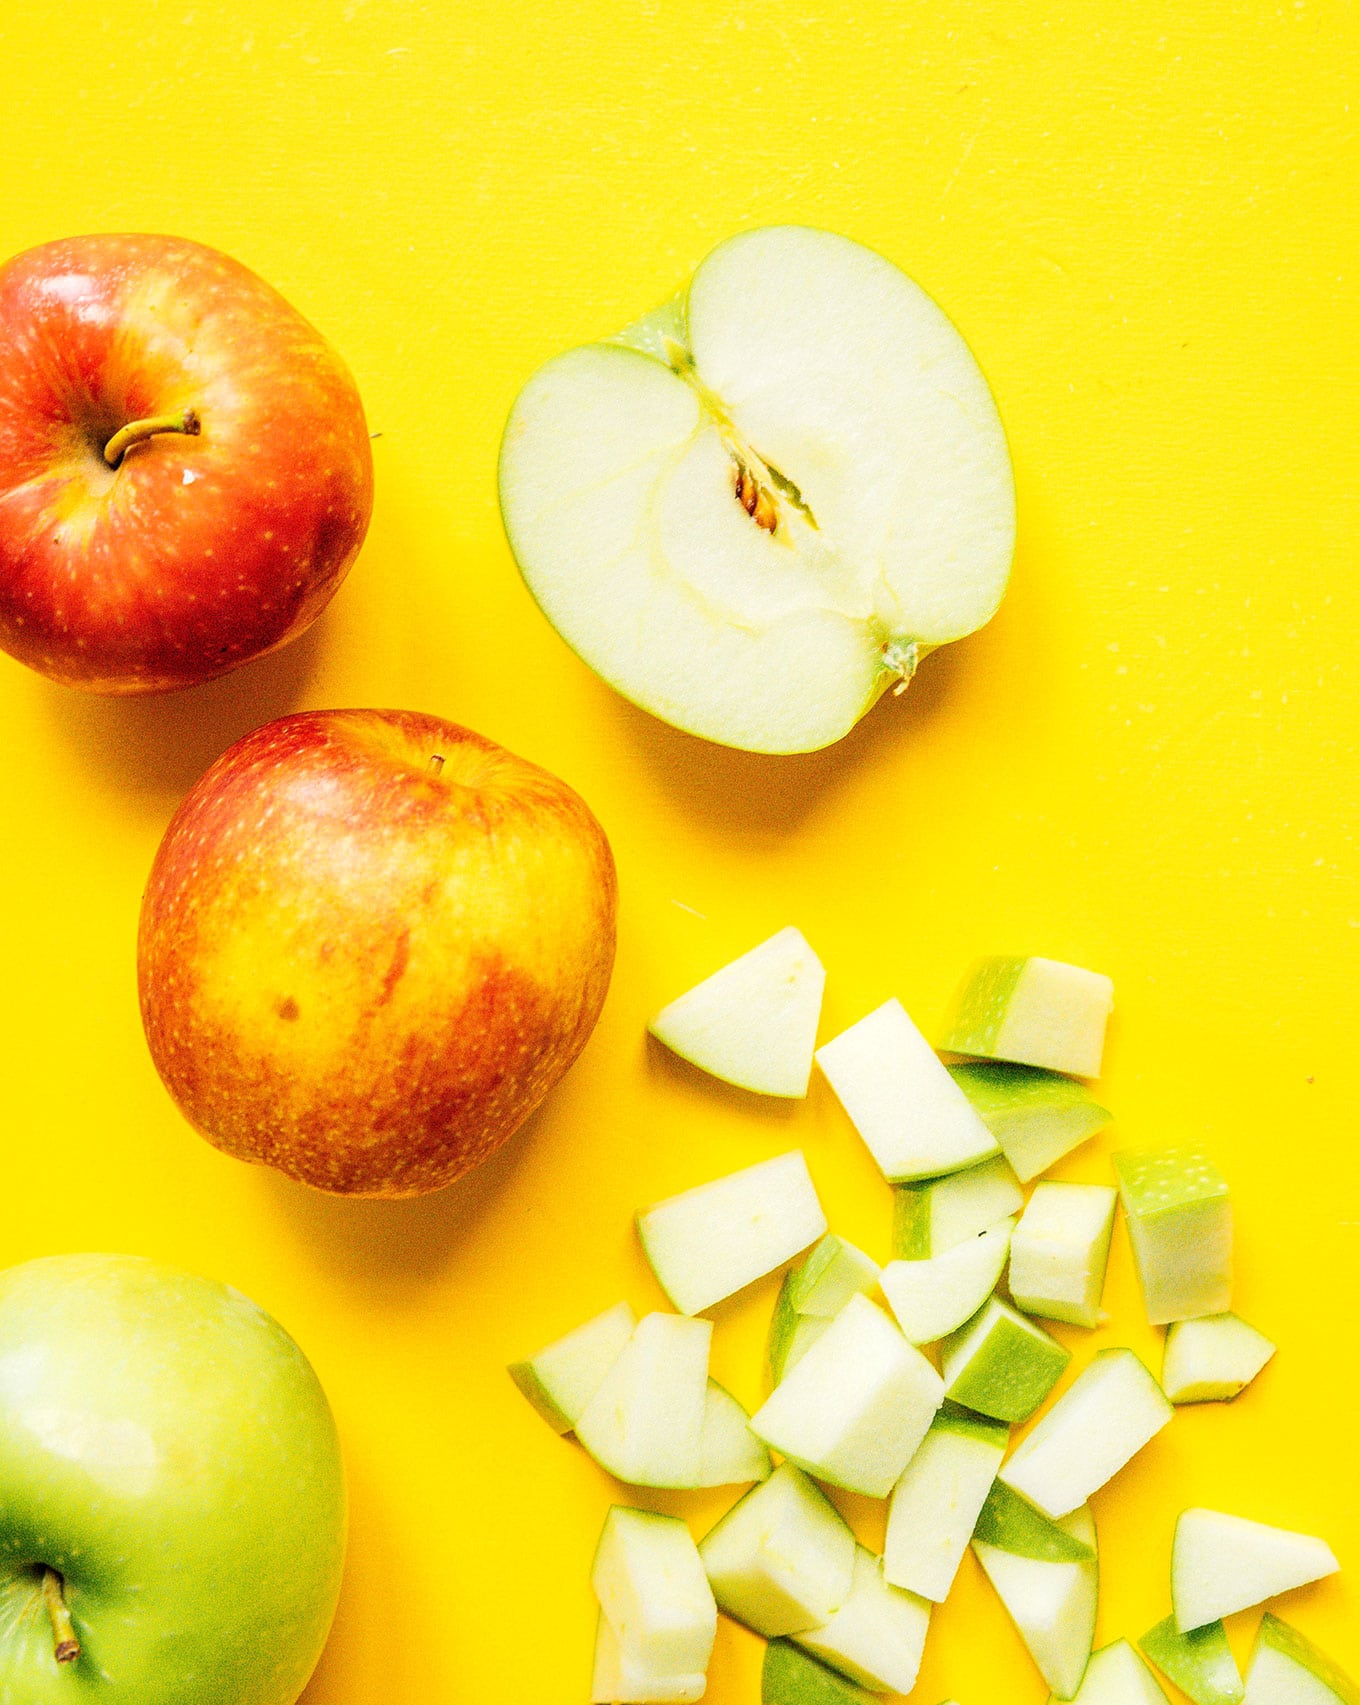 Three whole apples, an apple half, and diced apple pieces arranged on a yellow background